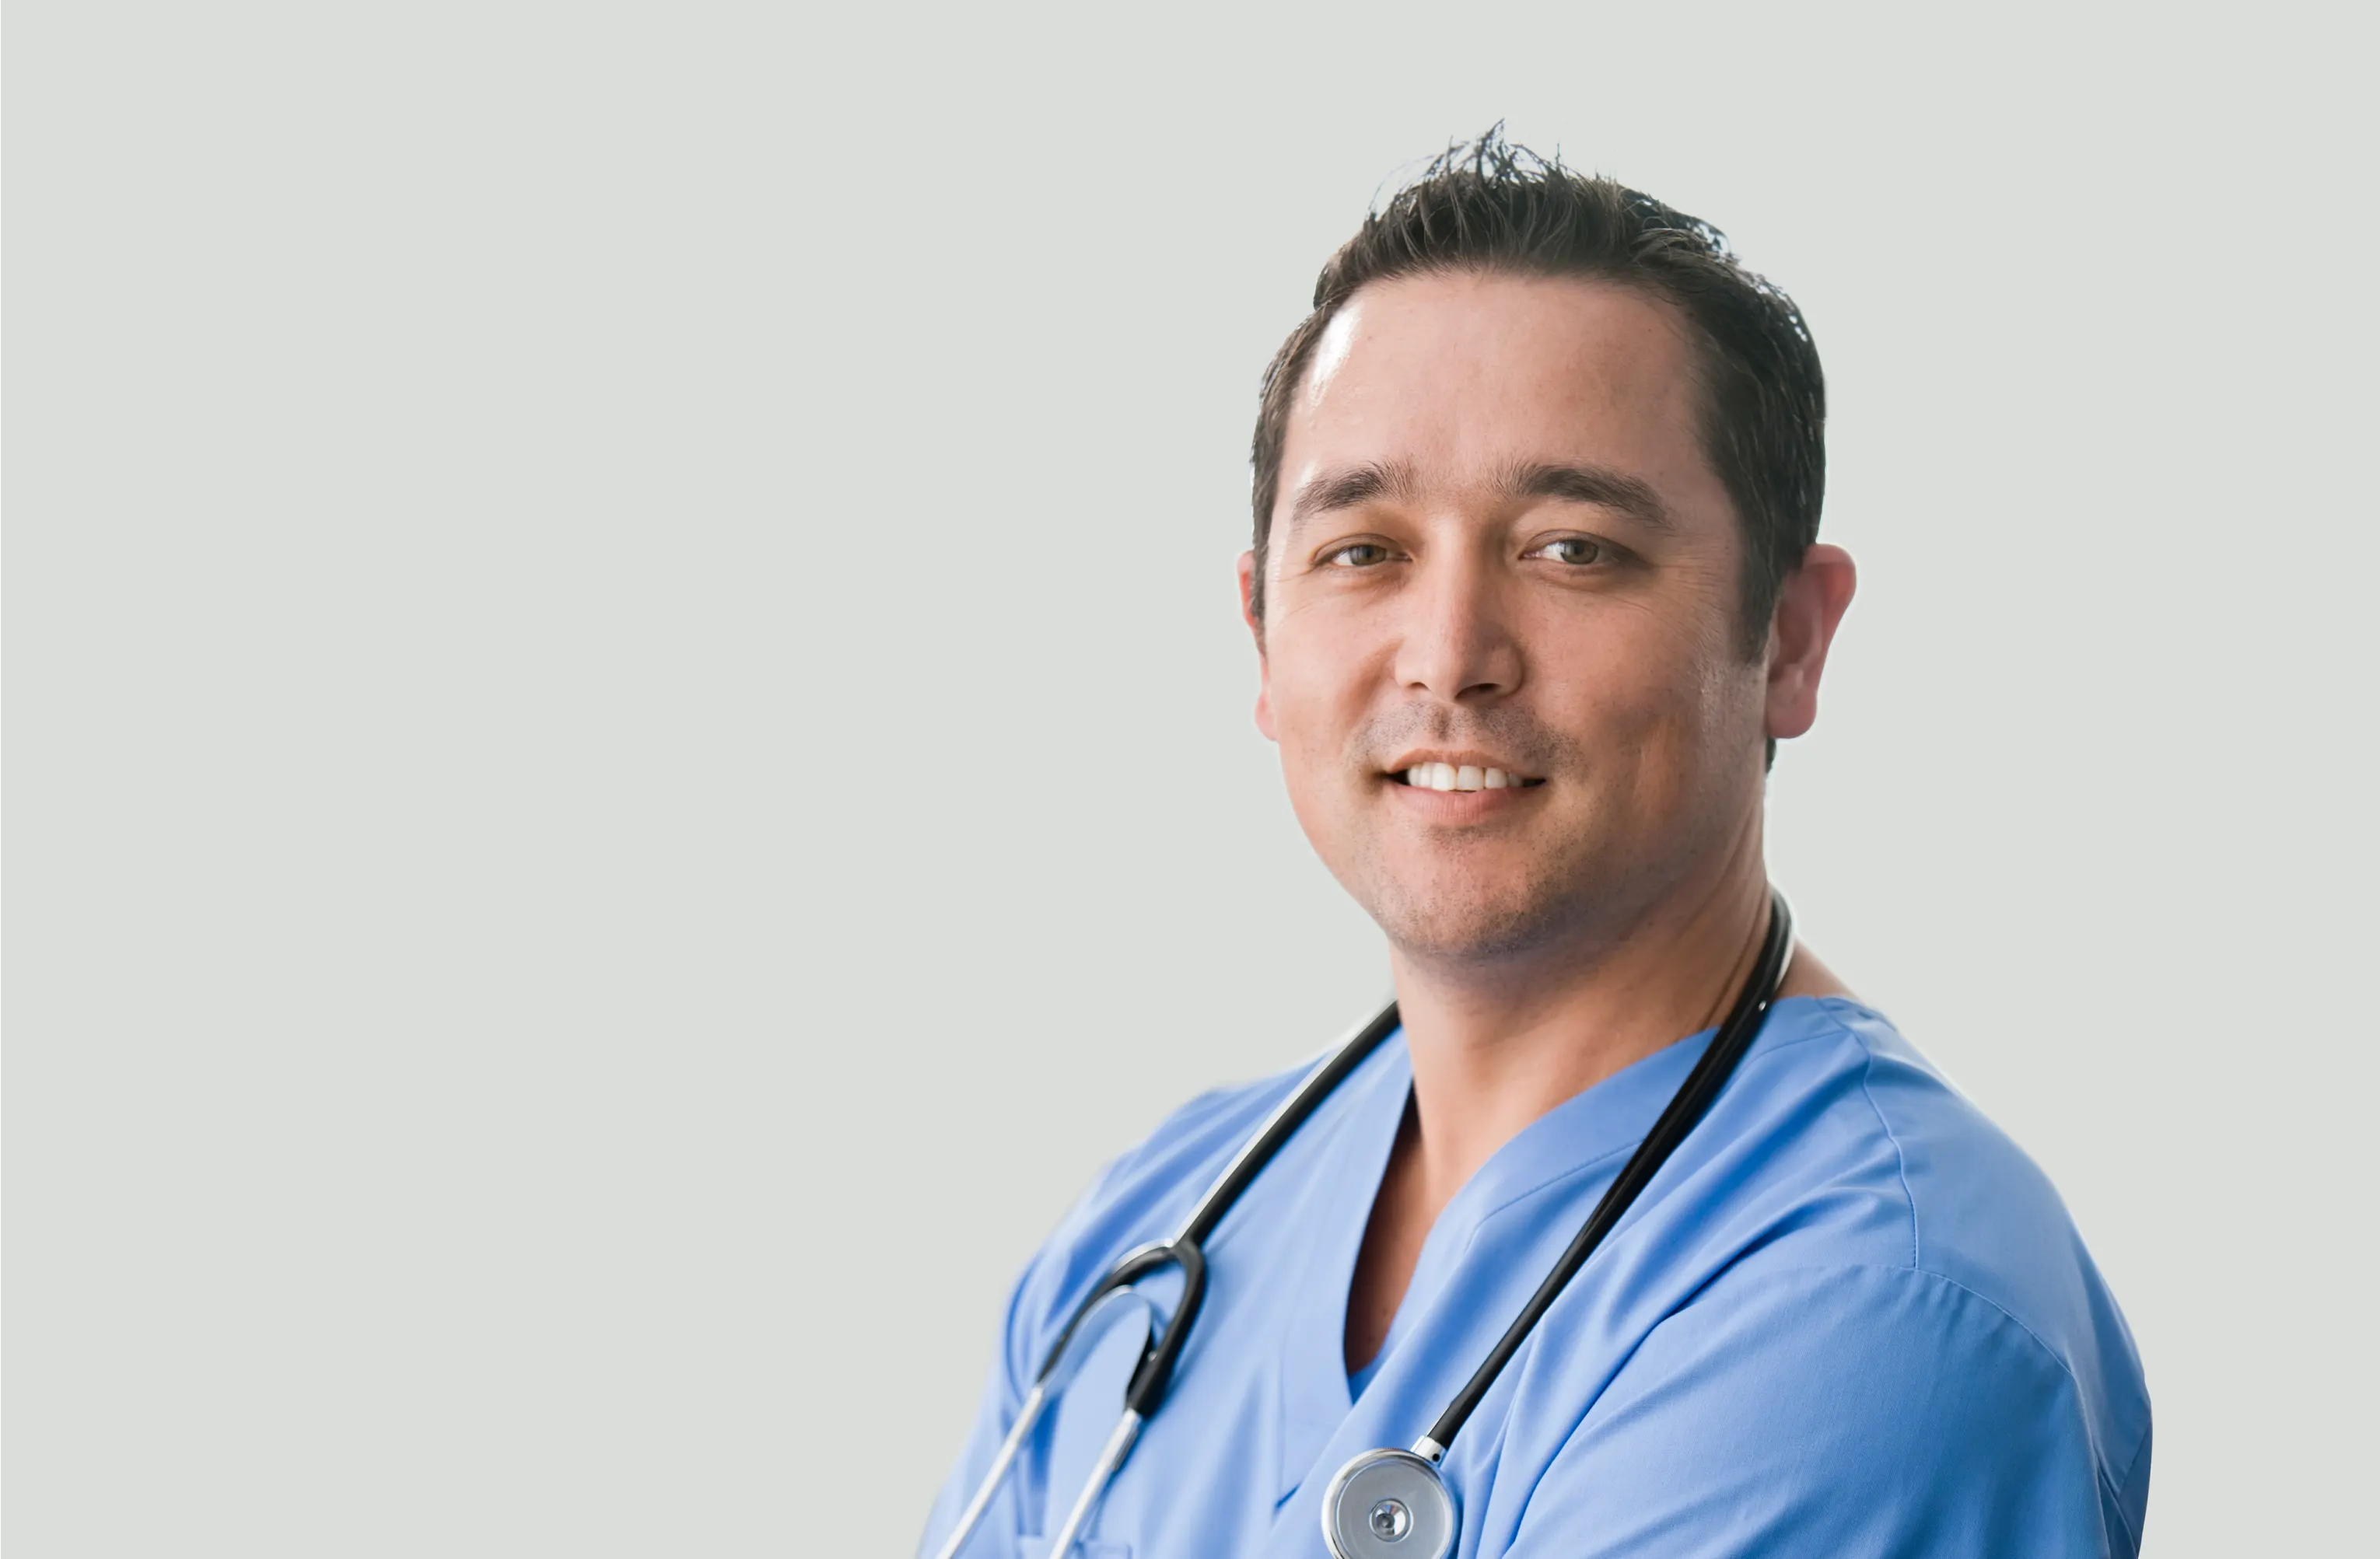 Middle aged white male in blue doctor scrubs